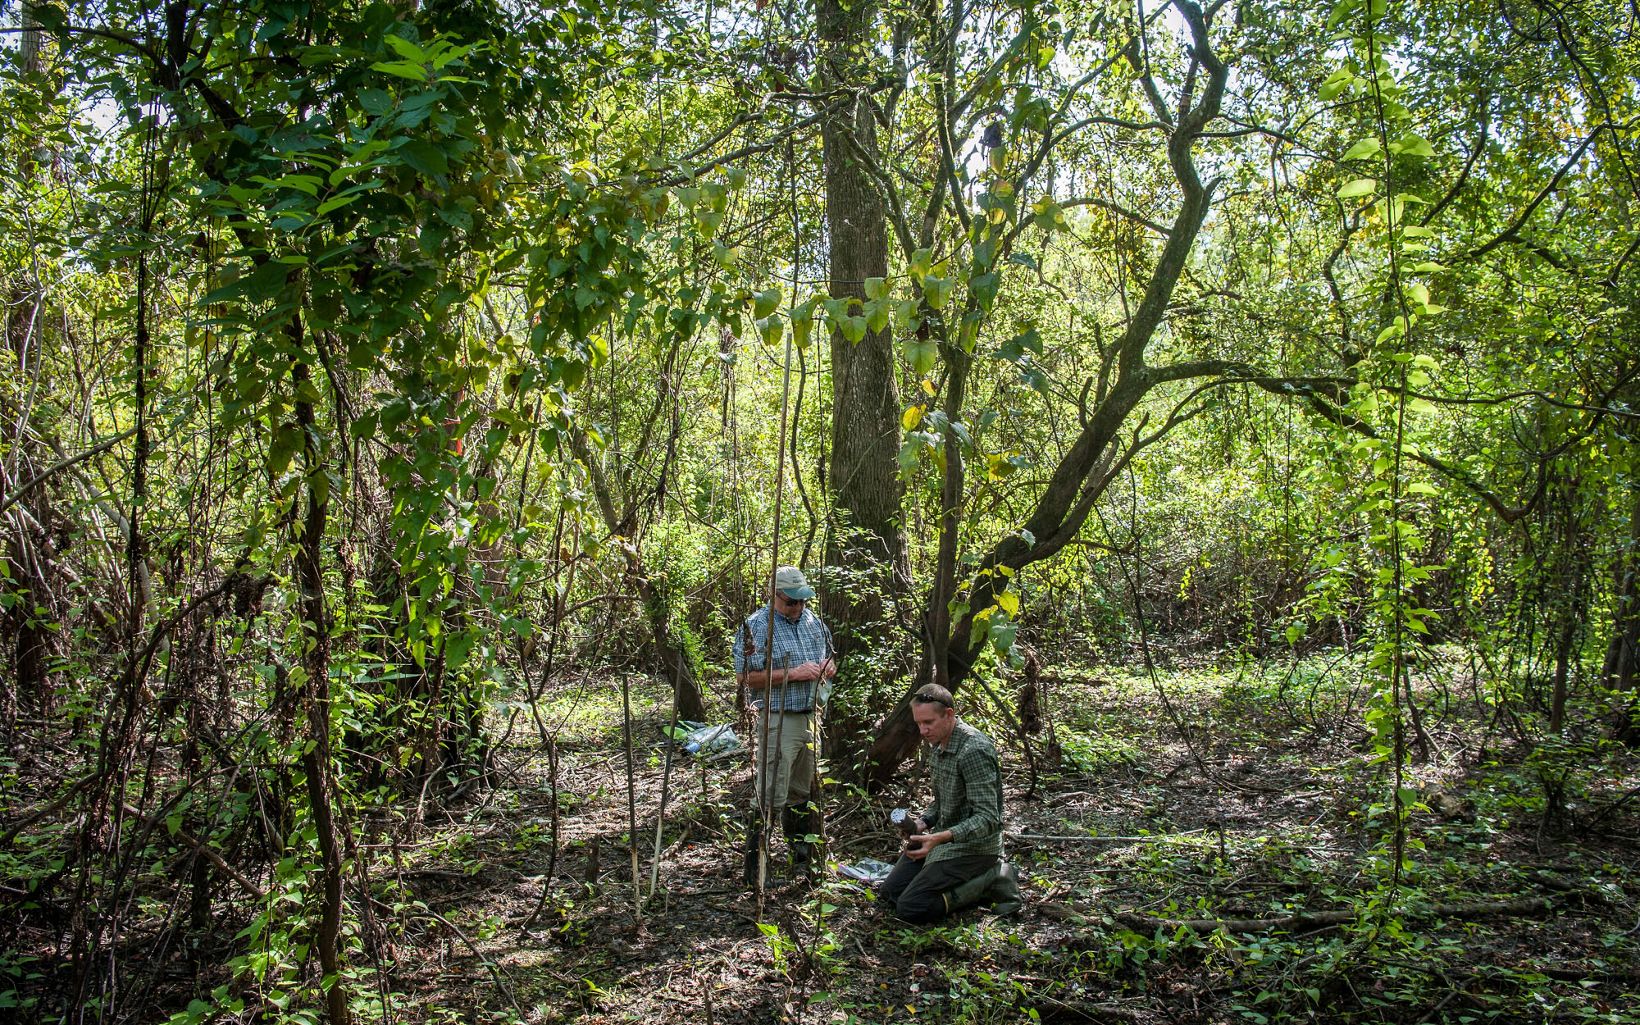 Two men are in a wooded area. one is kneeling and monitoring a device while the other is standing and checking the leaves on a branch.